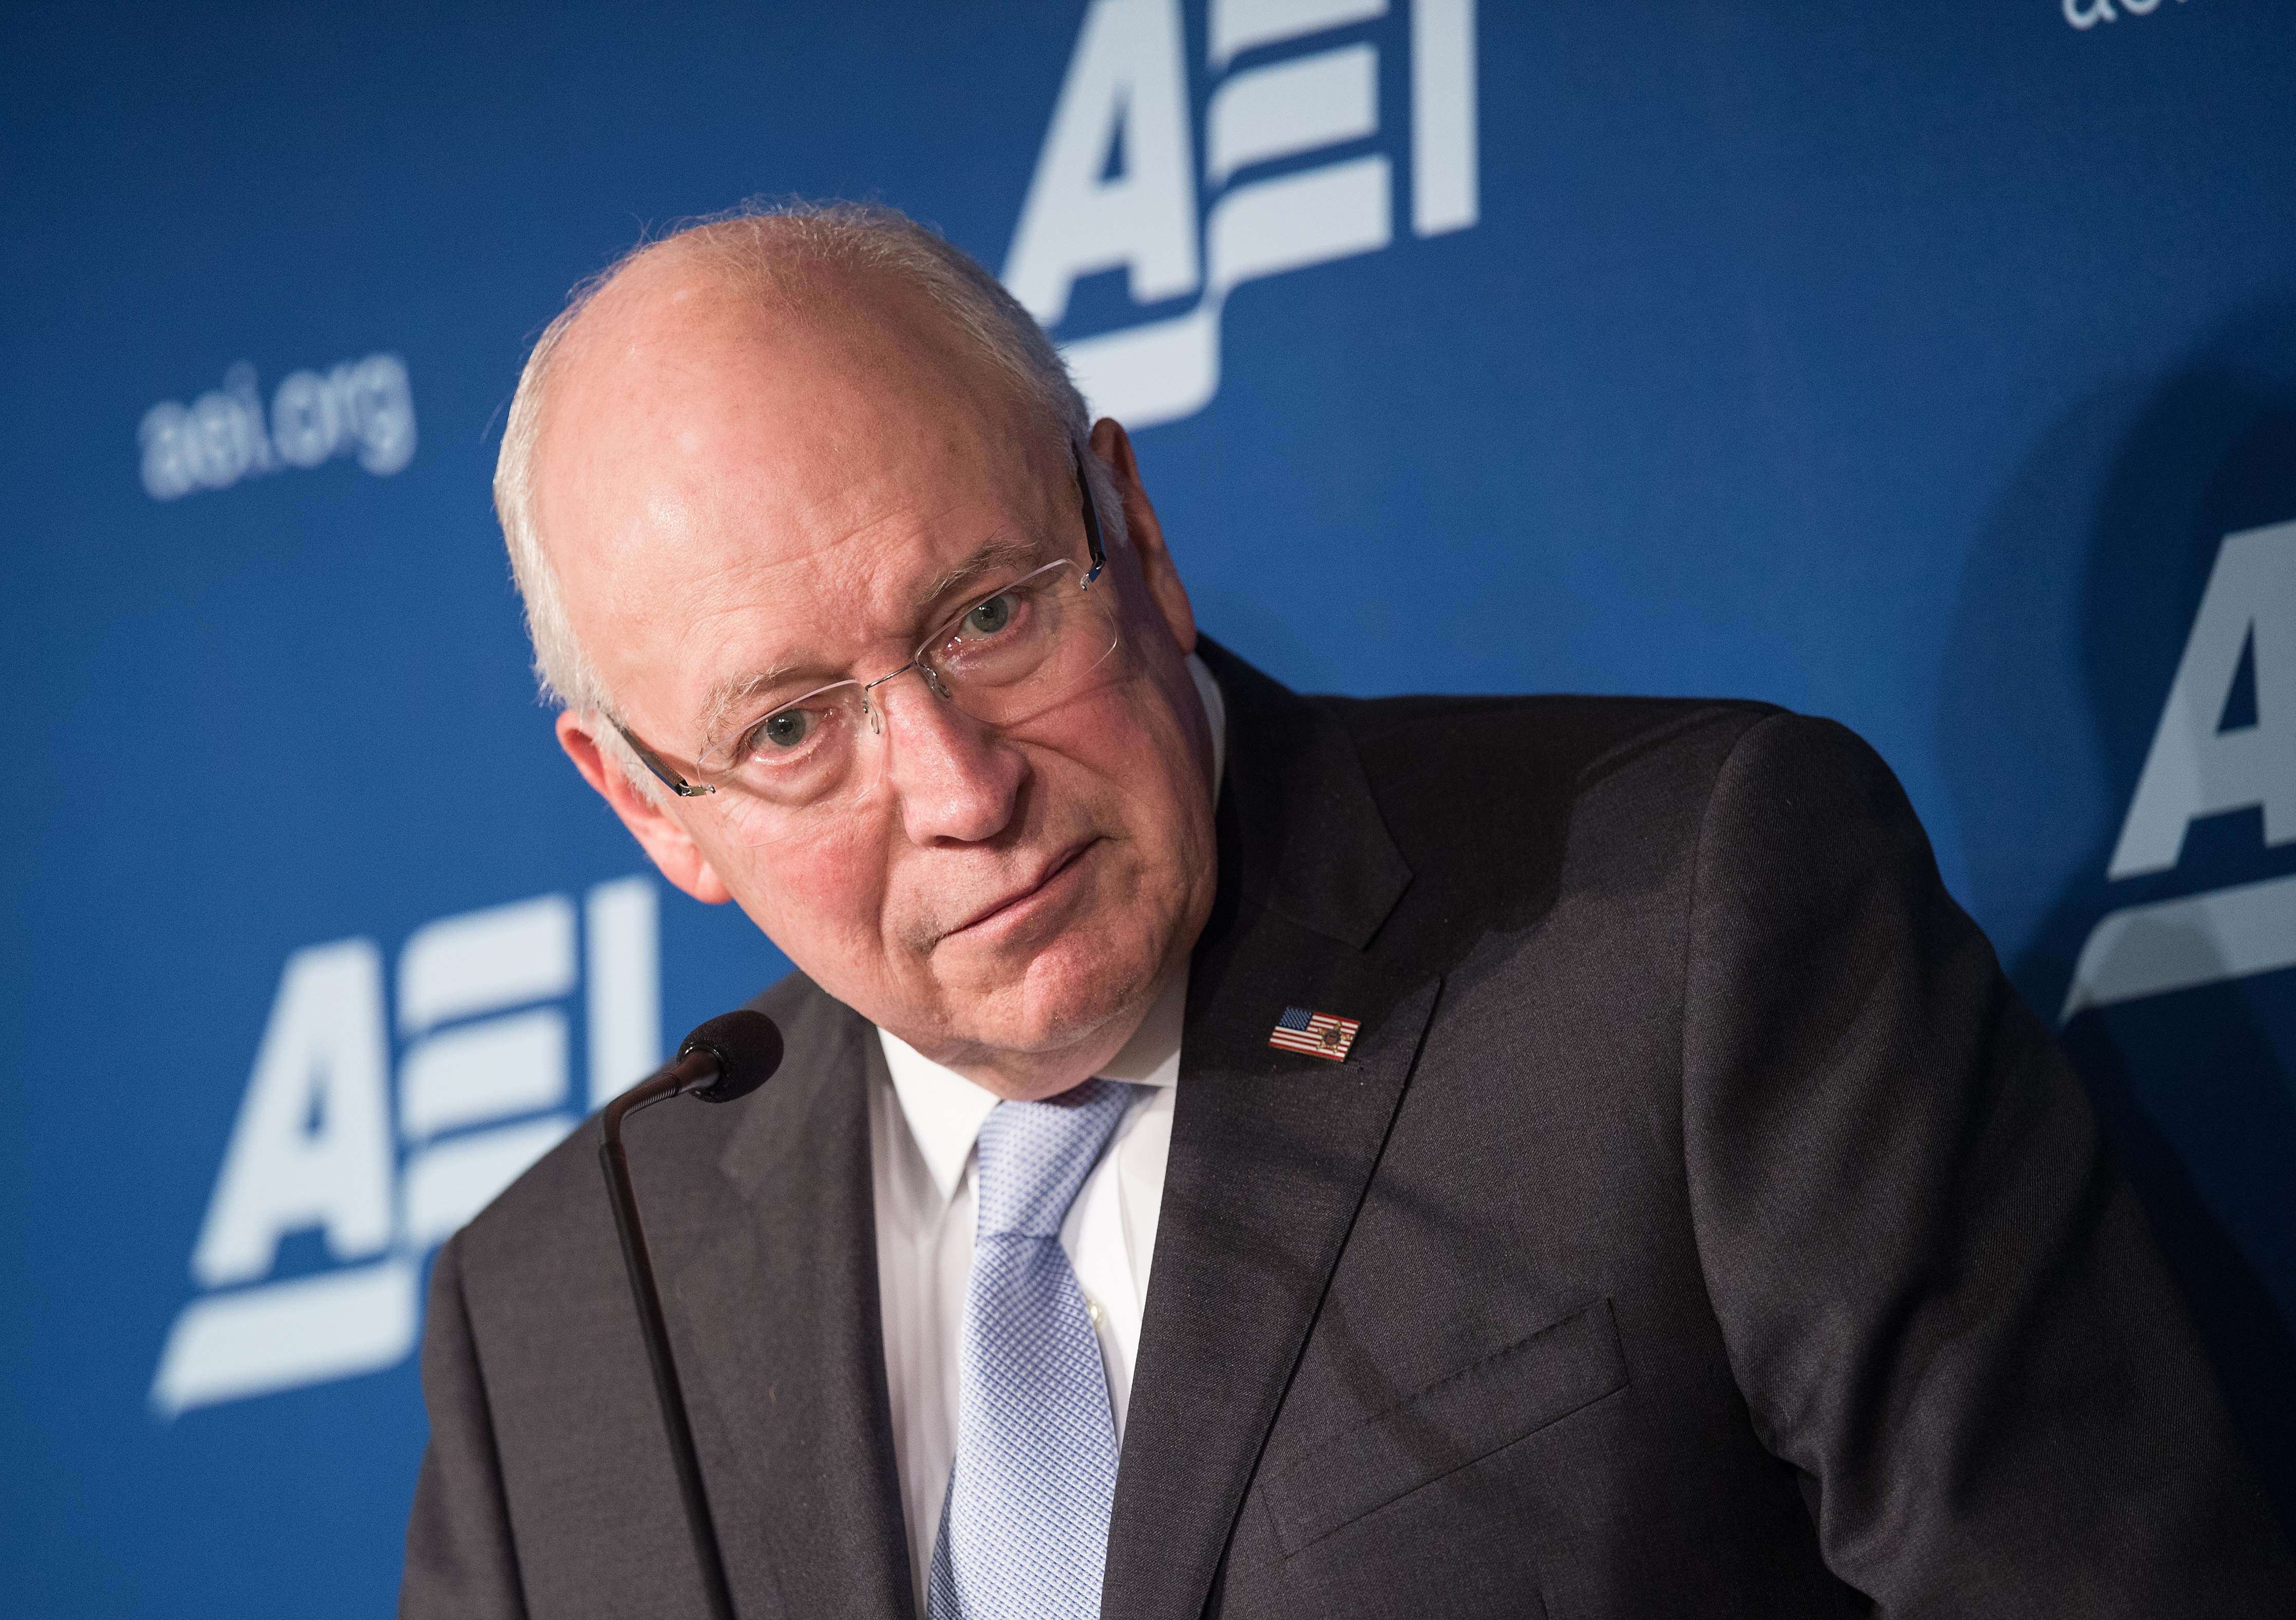 Dick Cheney speaks against the Iranian nuclear deal at the American Enterprise Institute (AEI) on Sept. 8, 2015 in Washington. (Nicholas Kamm—AFP/Getty Images)